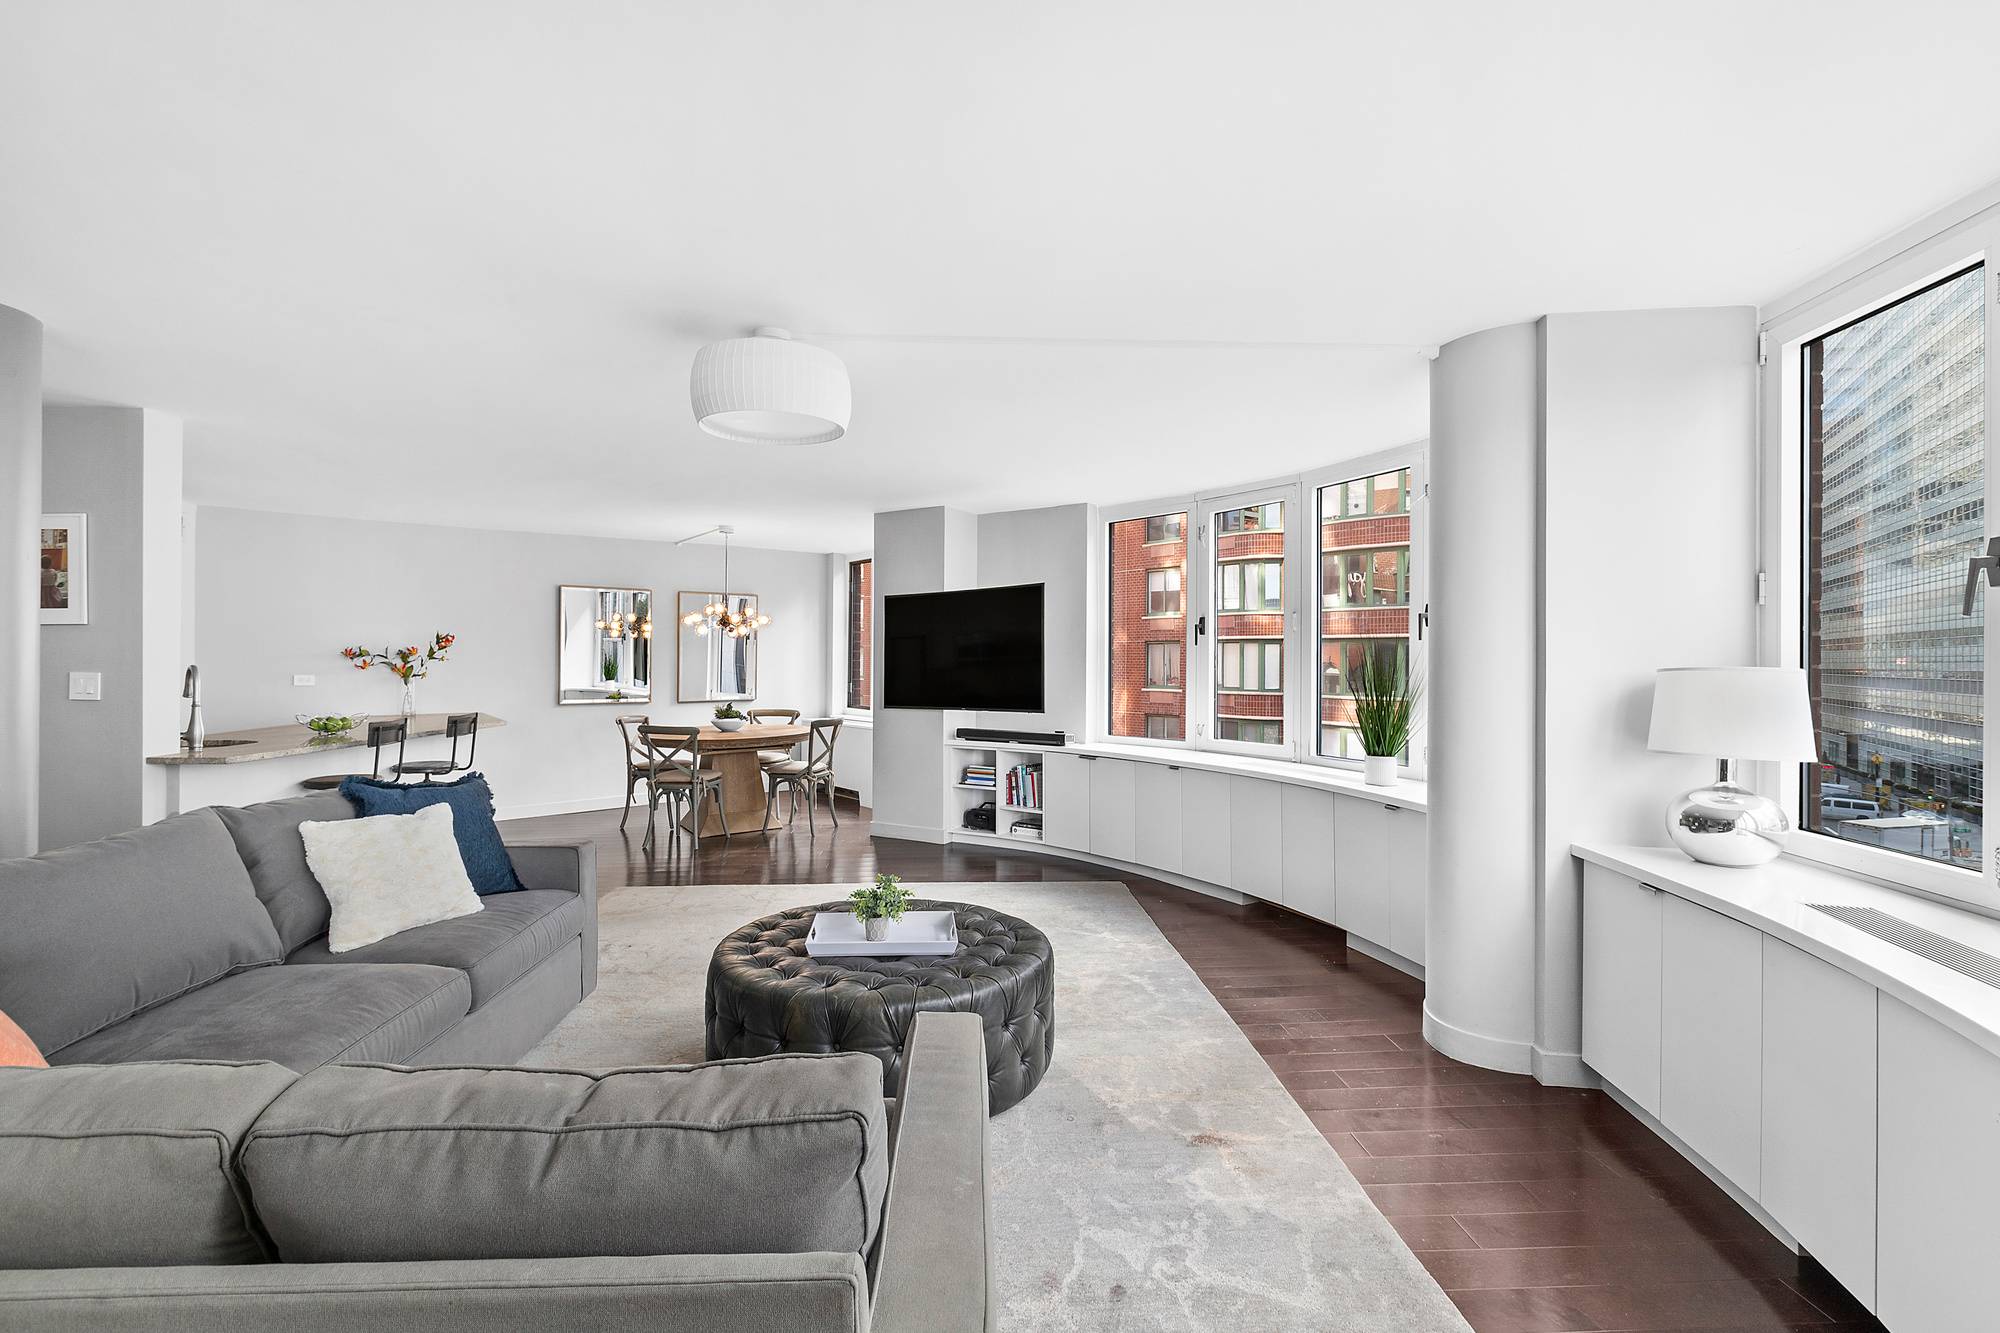 Welcome to 5A at the Greenwich Court Condominium, a grand scaled home in prime Tribeca.